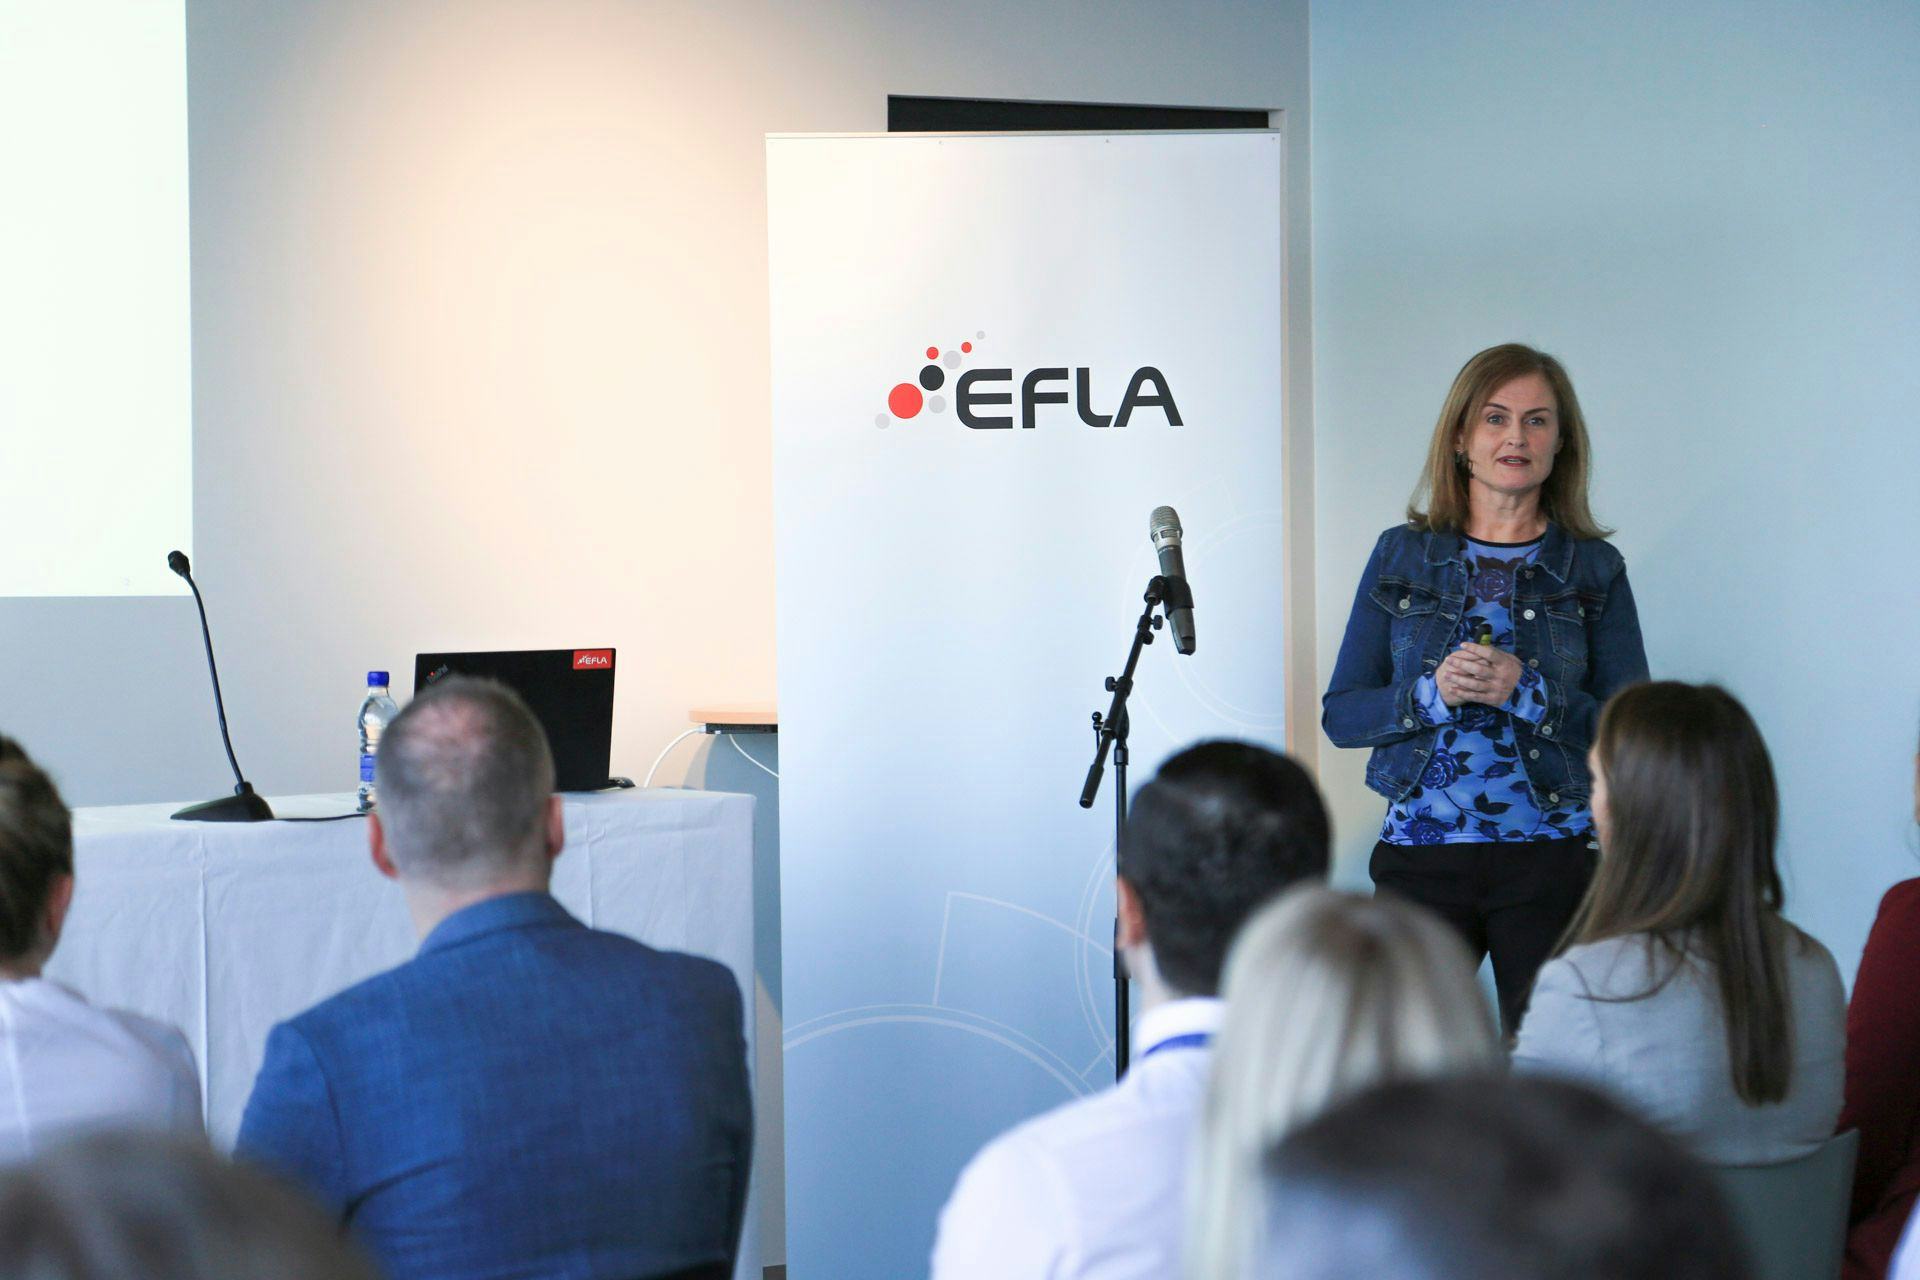 An audience listening to a speaker at a conference or presentation with the "EFLA" banner in the background